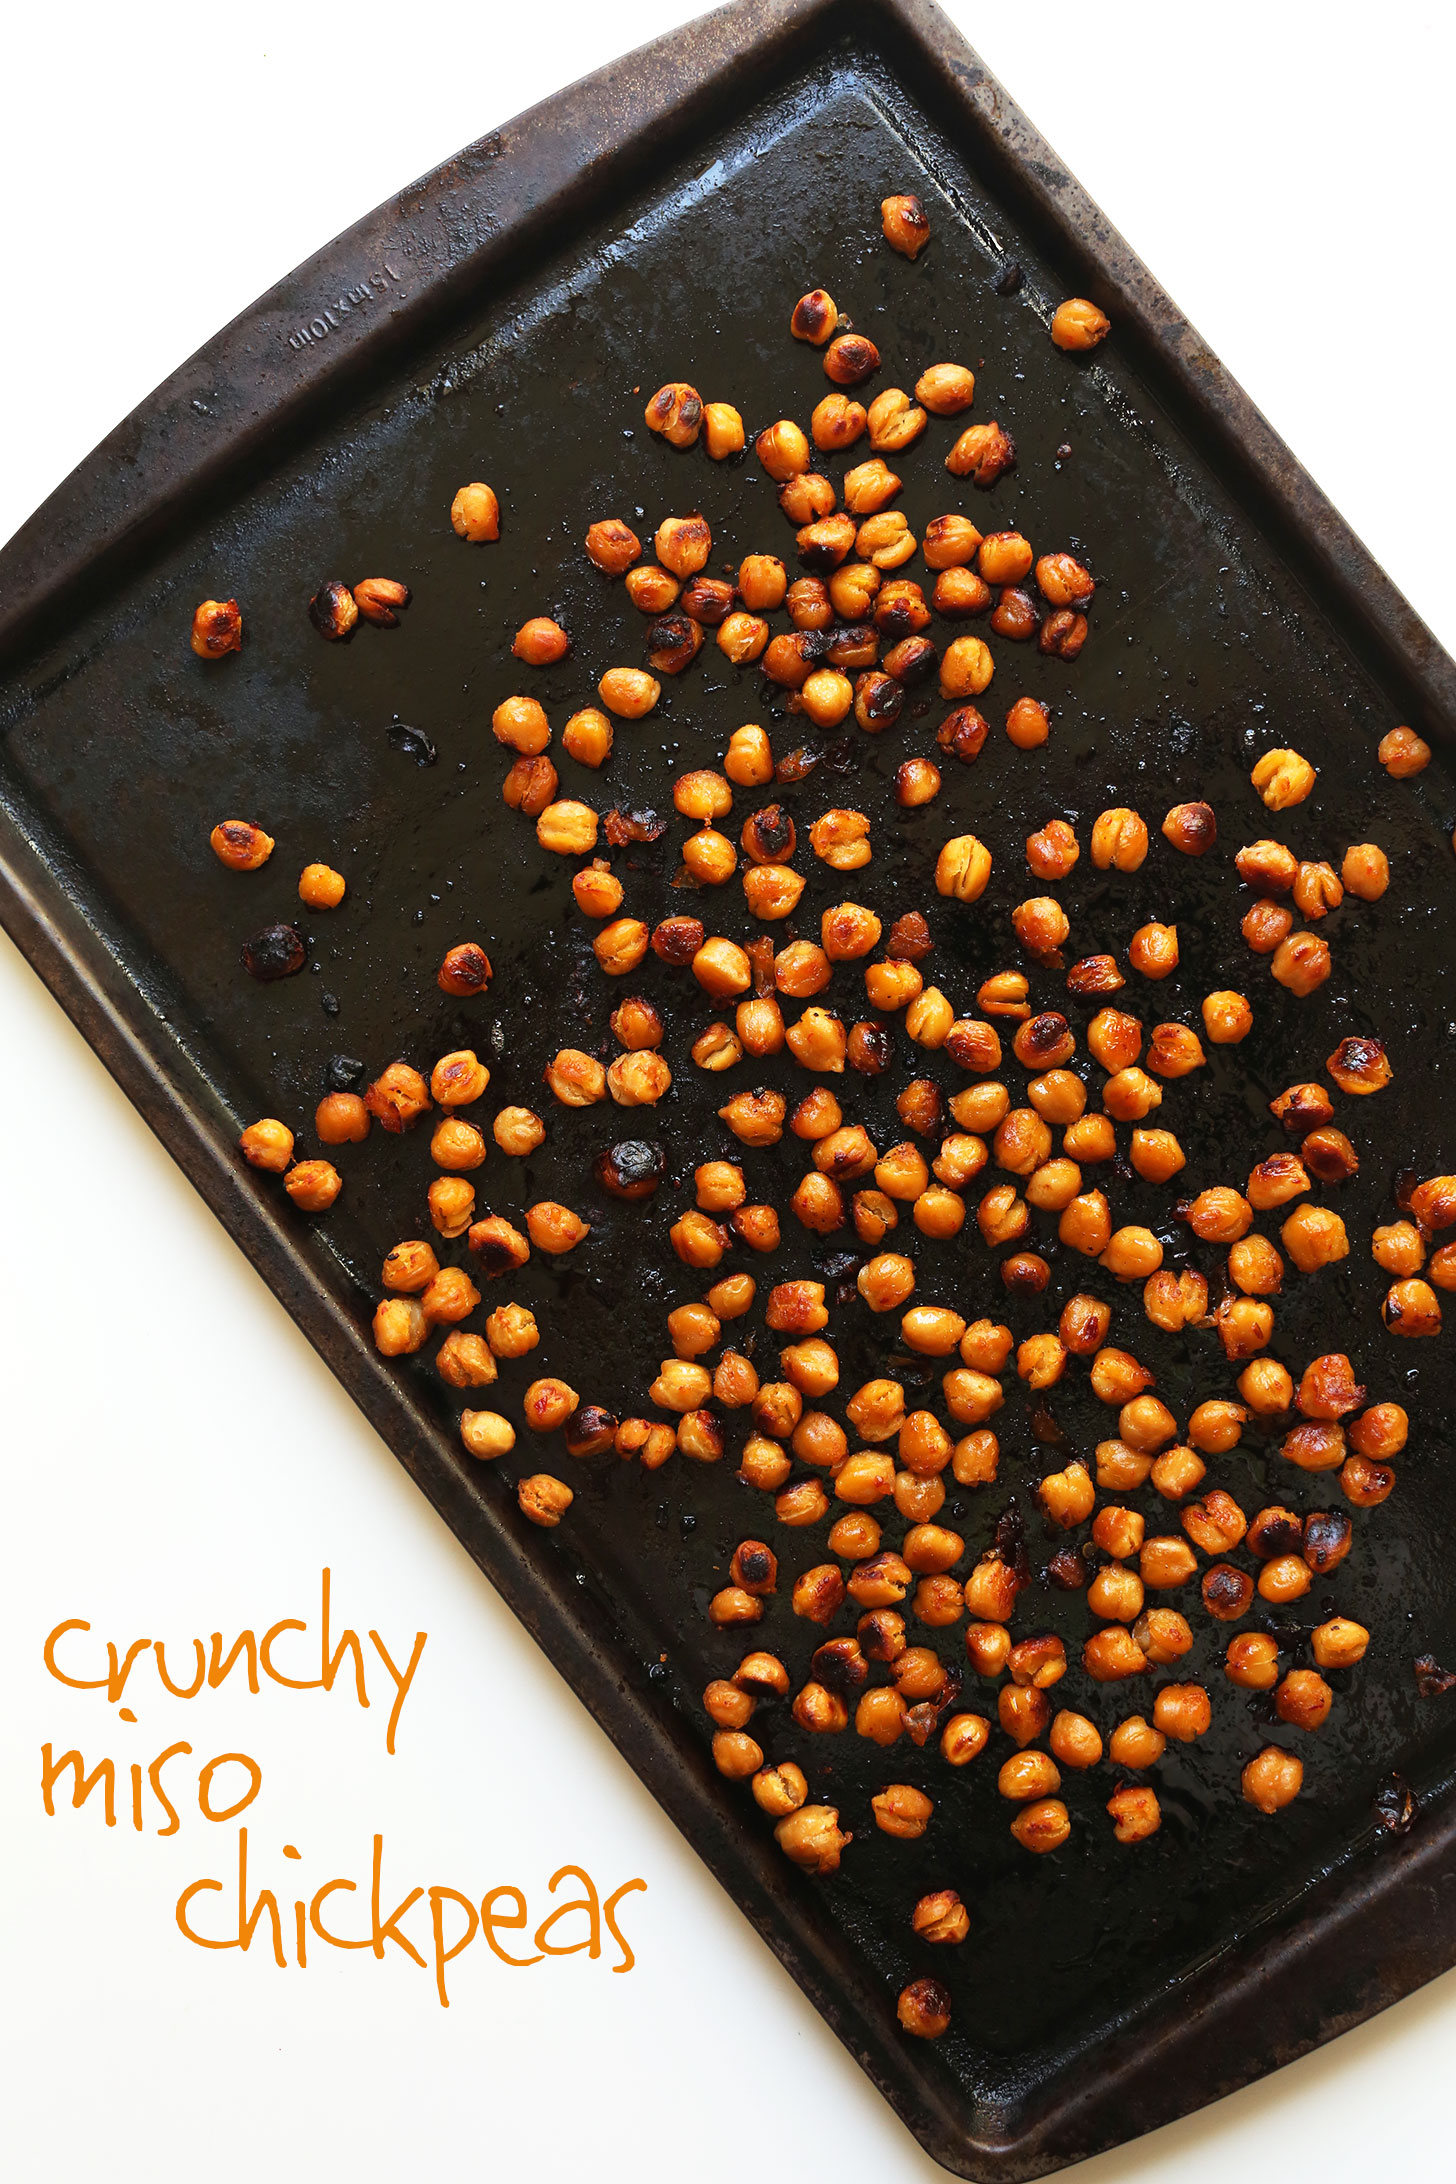 Baking sheet with Crispy Miso Chickpeas for our Crunchy Kale Salad